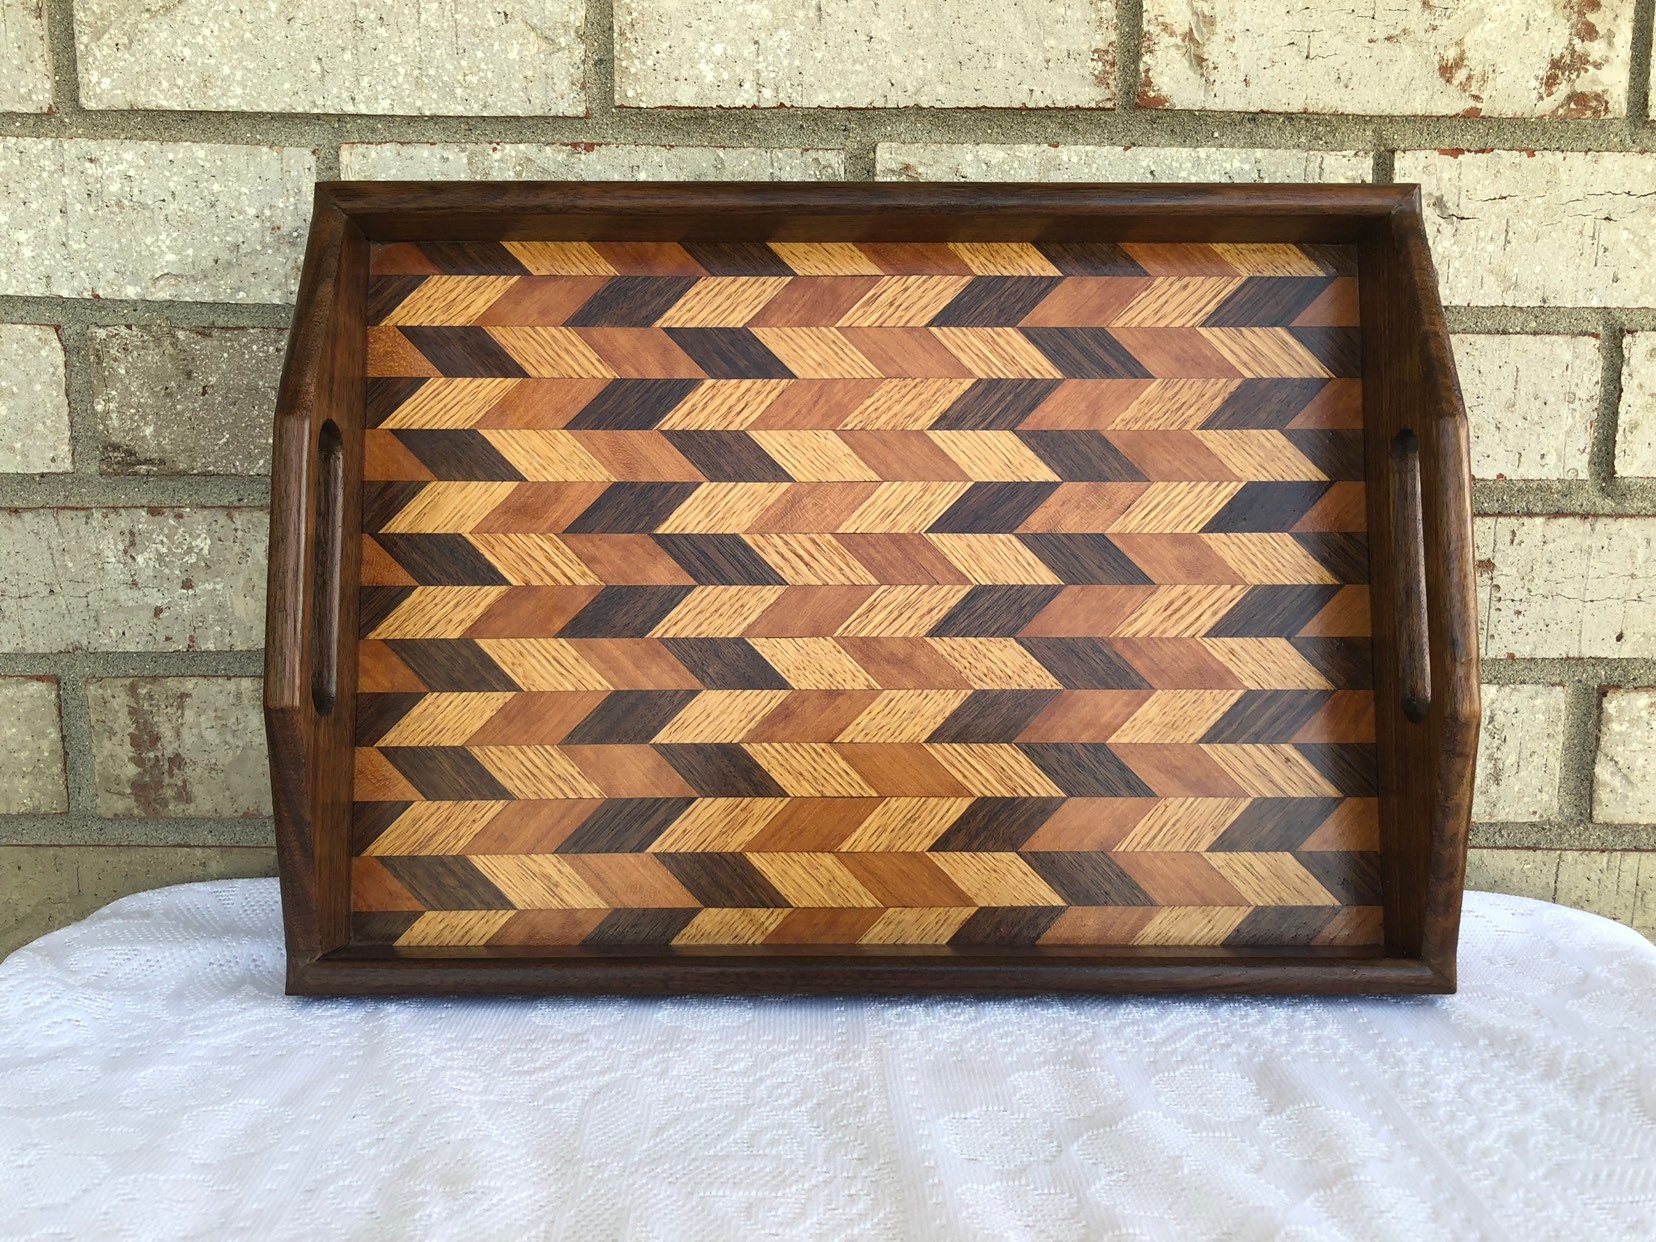 Untreated Wood Tray-unfinished Wood Tray-decoupage Wood Tray-pine Tree  Trays breakfast Tray Wood Serving Tray Decorative Wooden Tray 